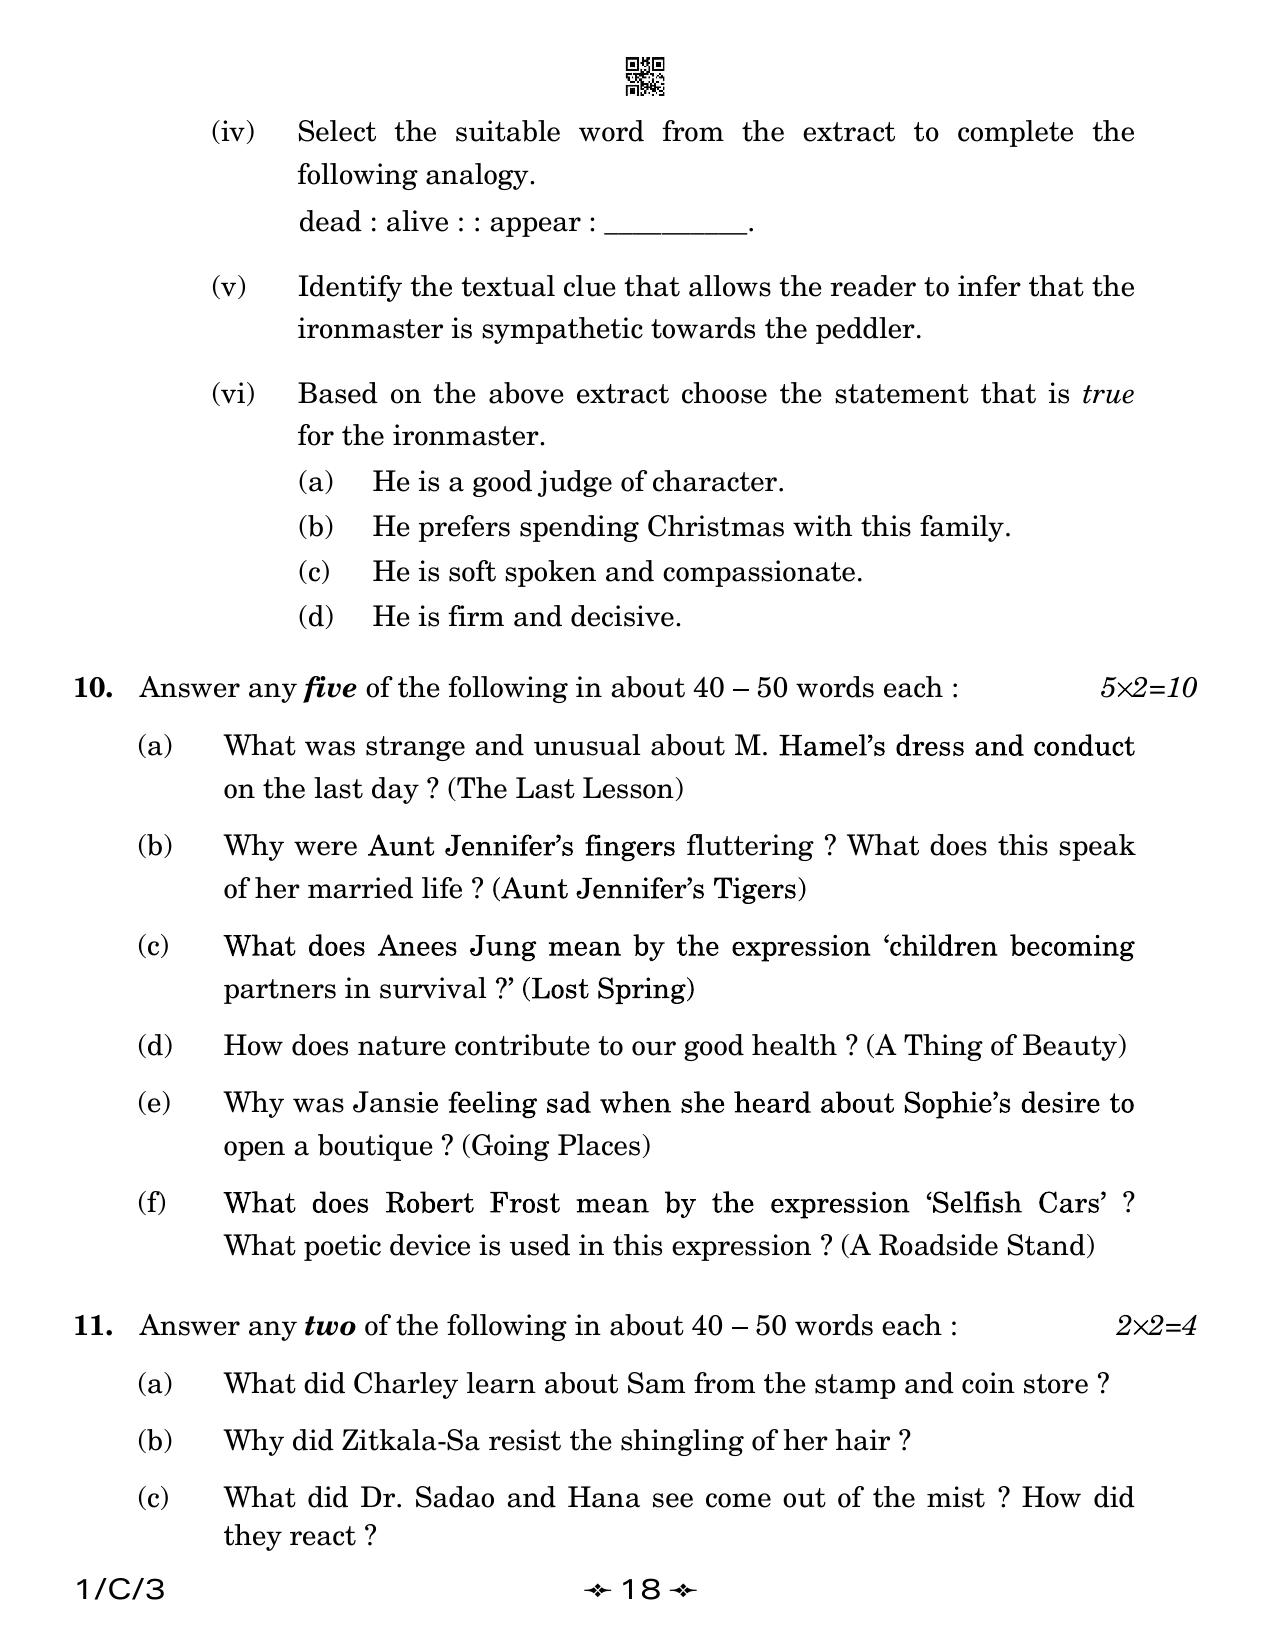 CBSE Class 12 1-3 English Core 2023 (Compartment) Question Paper - Page 18